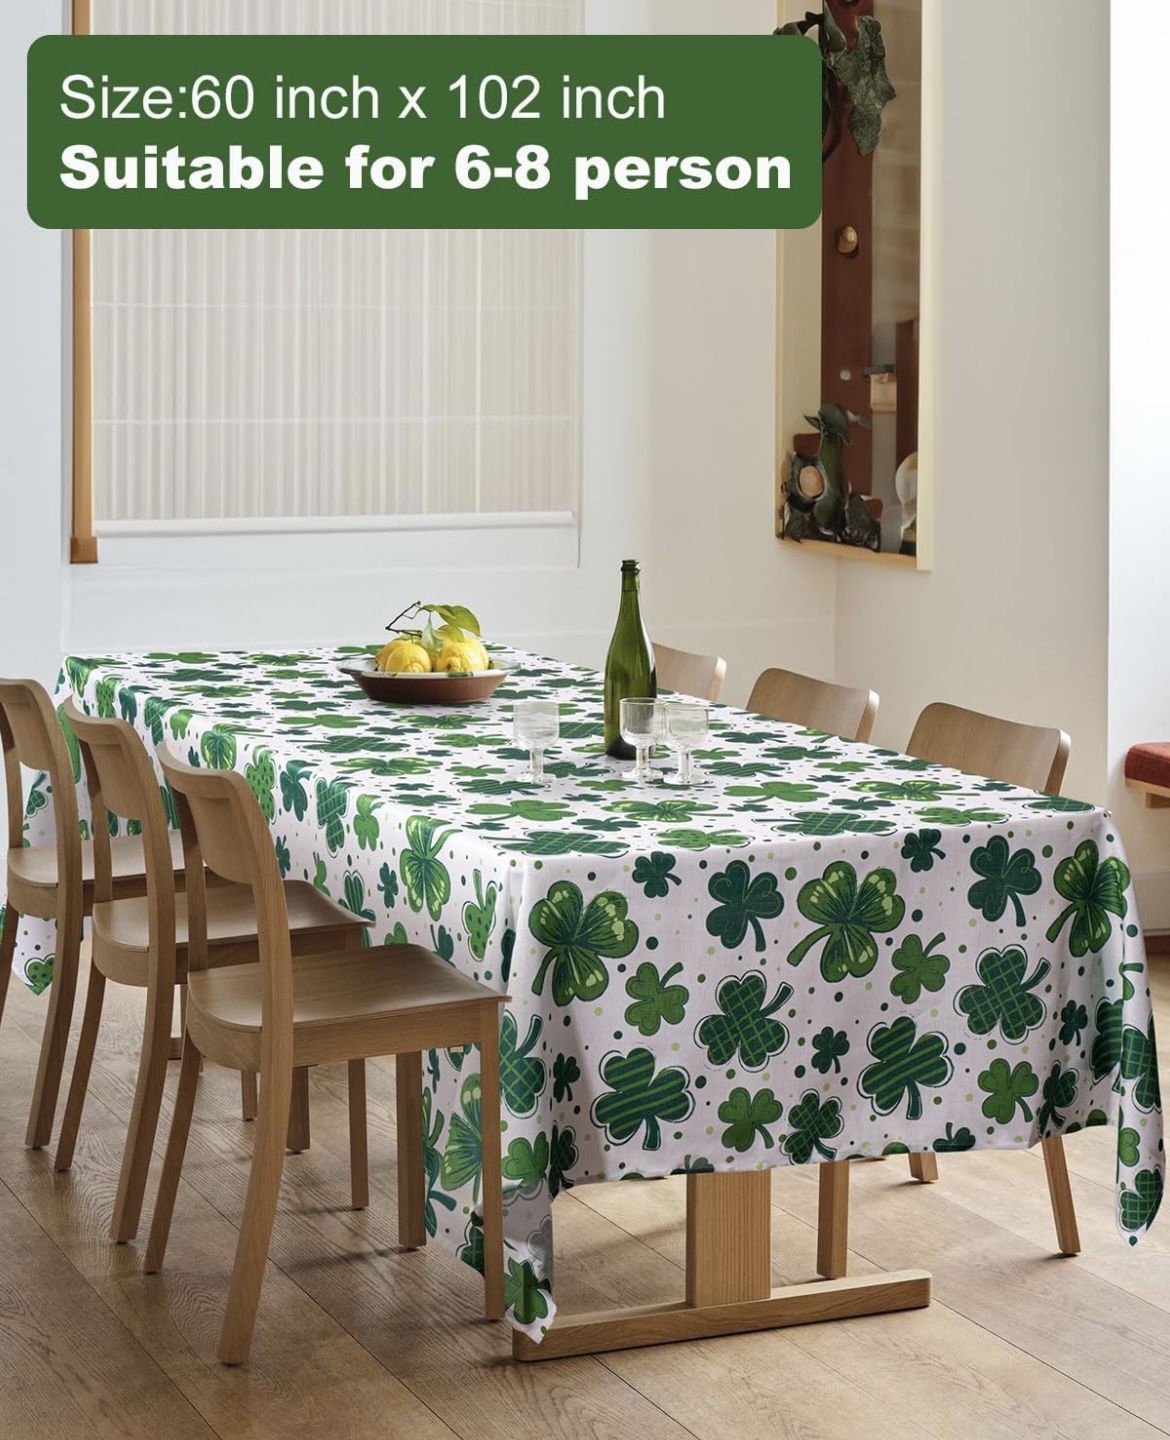 St. Patrick's Day Tablecloth Rectangle, Shamrock Table Cloth 60 x 102 Inch